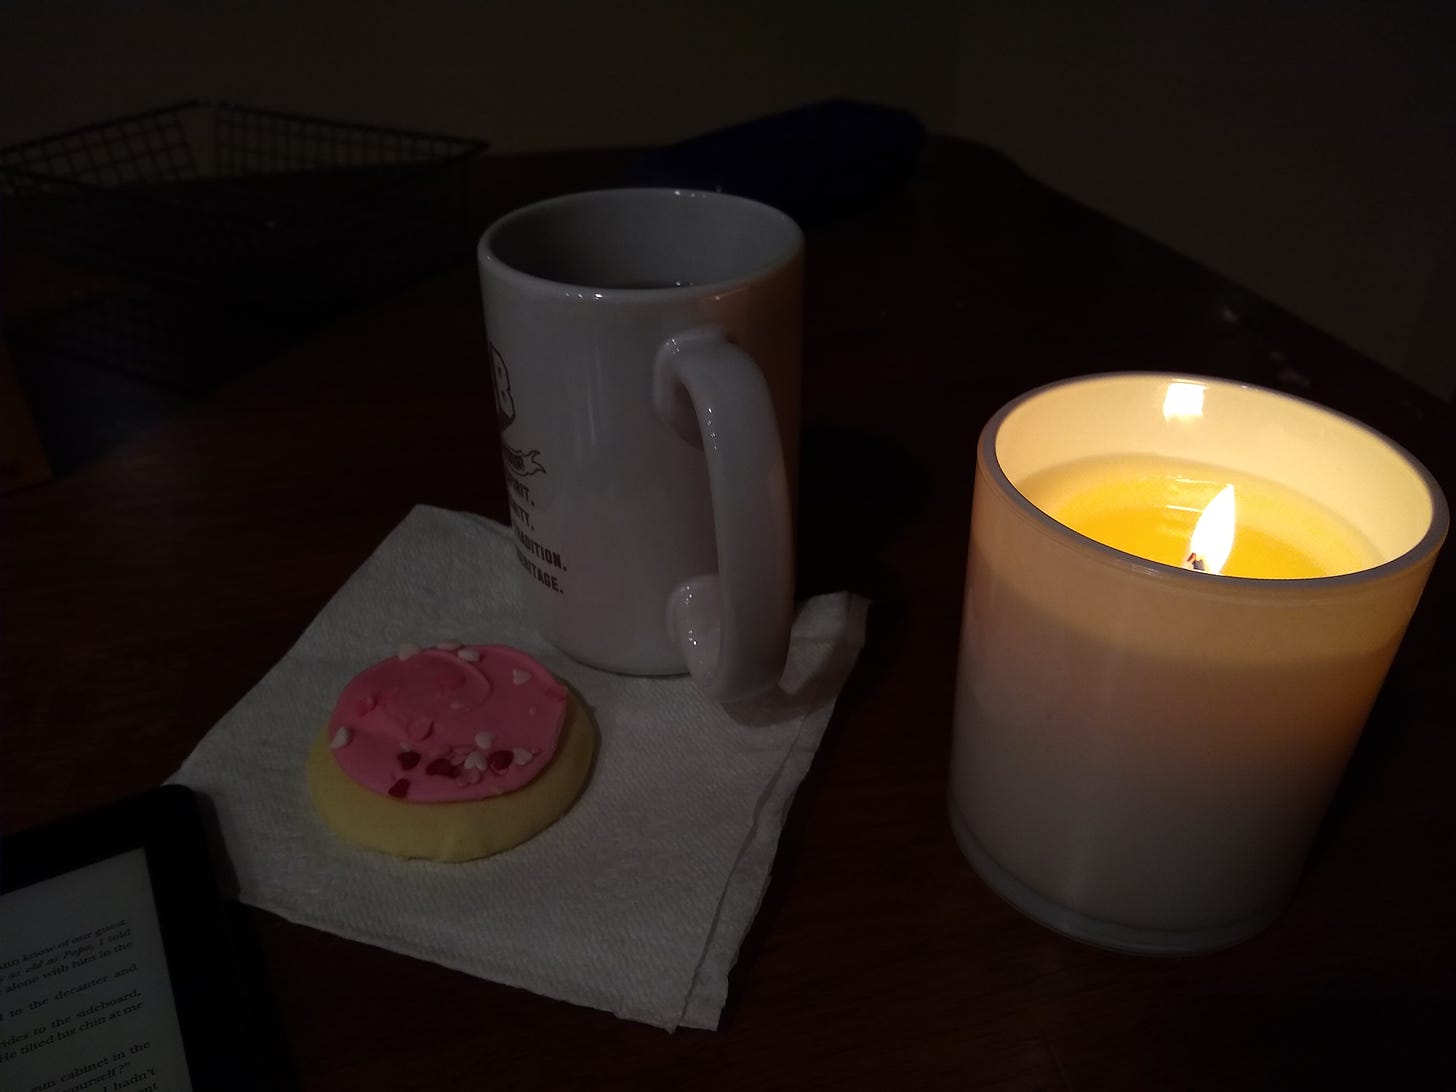 Corner of a Kindle, frosted sugar cookie on a napkin, mug, and a lit candle